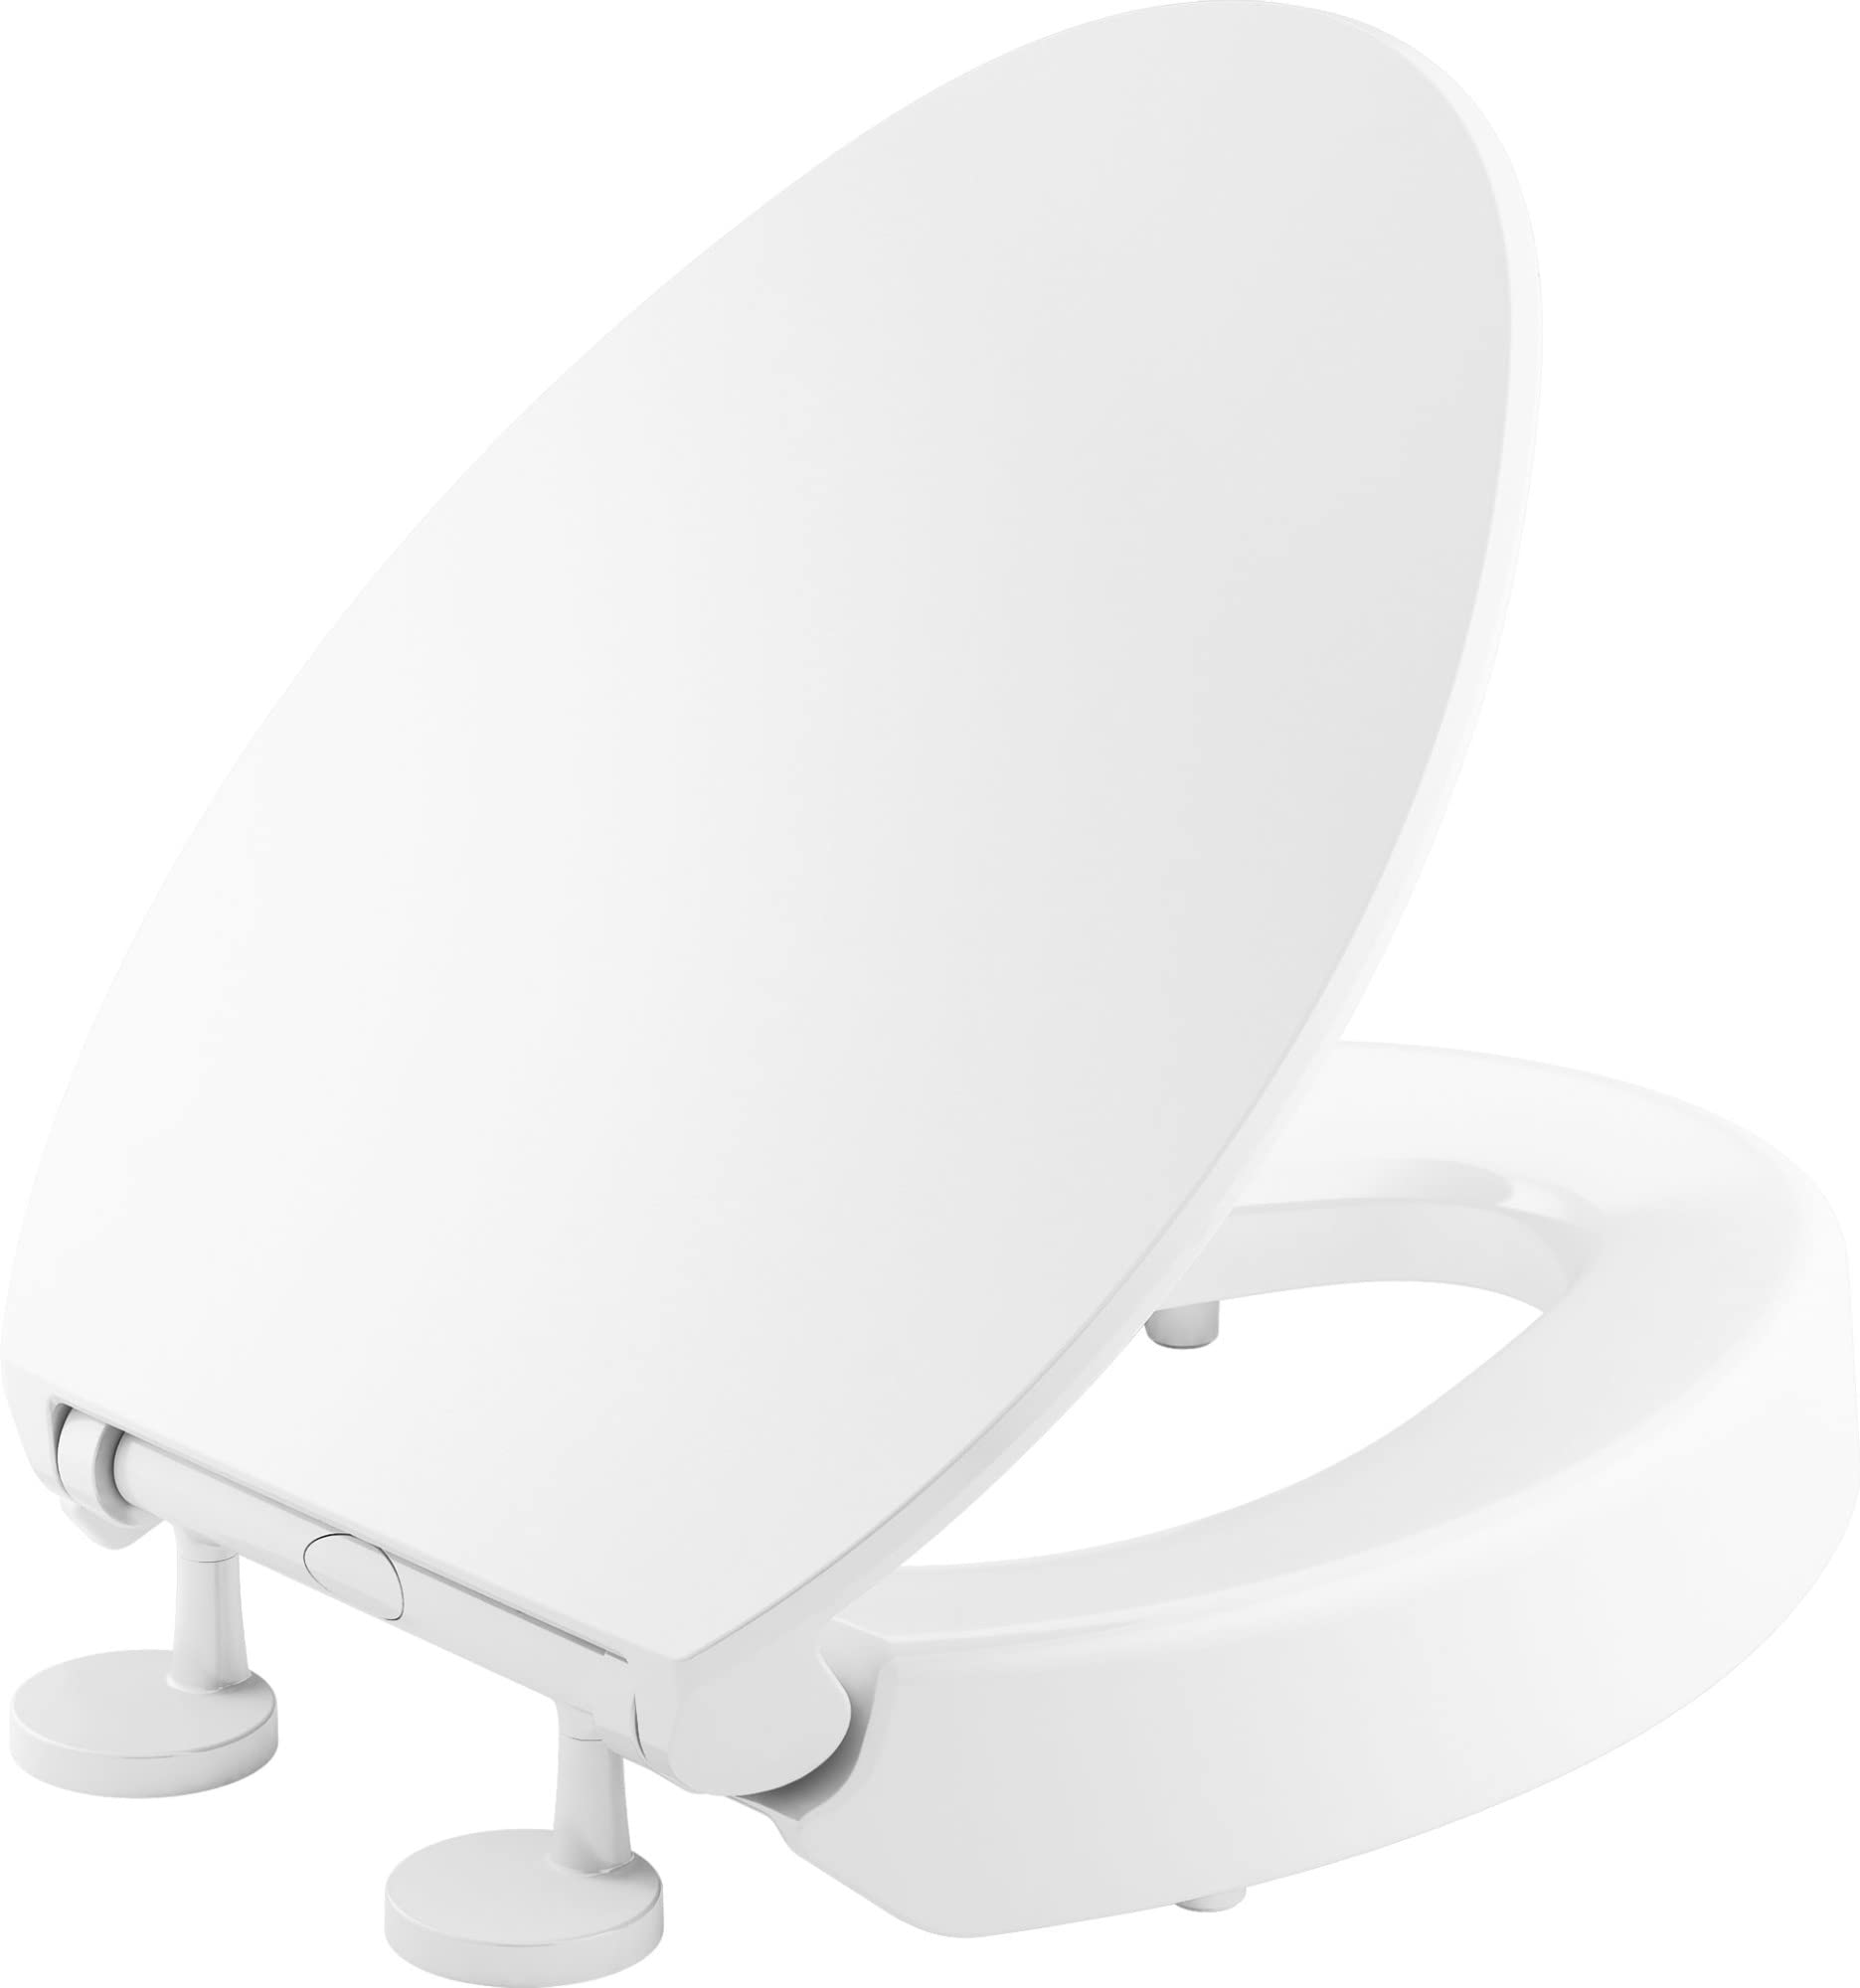 KOHLER 25875-0 Hyten Elevated Quiet-Close Elongated Toilet Seat, Contoured Seat with Grip-Tight Bumpers, Quick-Attach Hardware, White